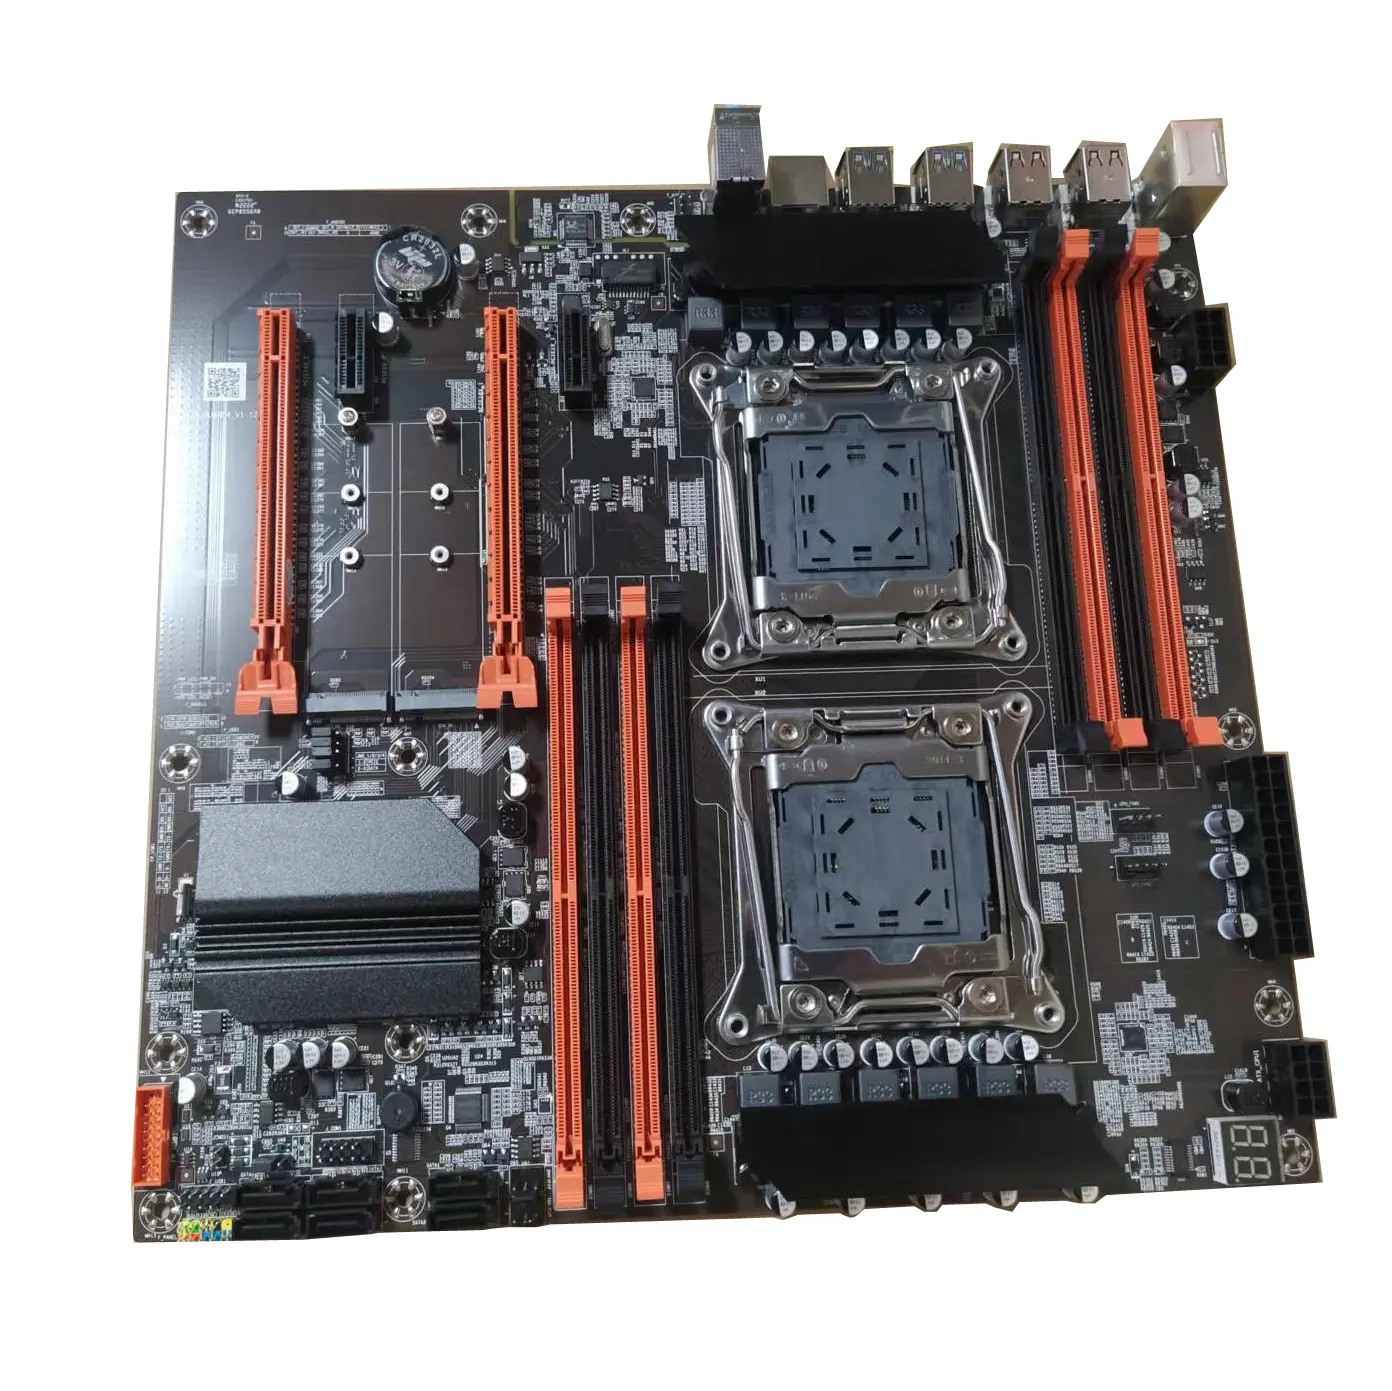 ALEO Zx-Du99 DDR4 Cpu Motherboard Support Dual Xeon E5 Lga2011 V3 V4 Series Processors Dual Chipset X99 PC Gaming Motherboard